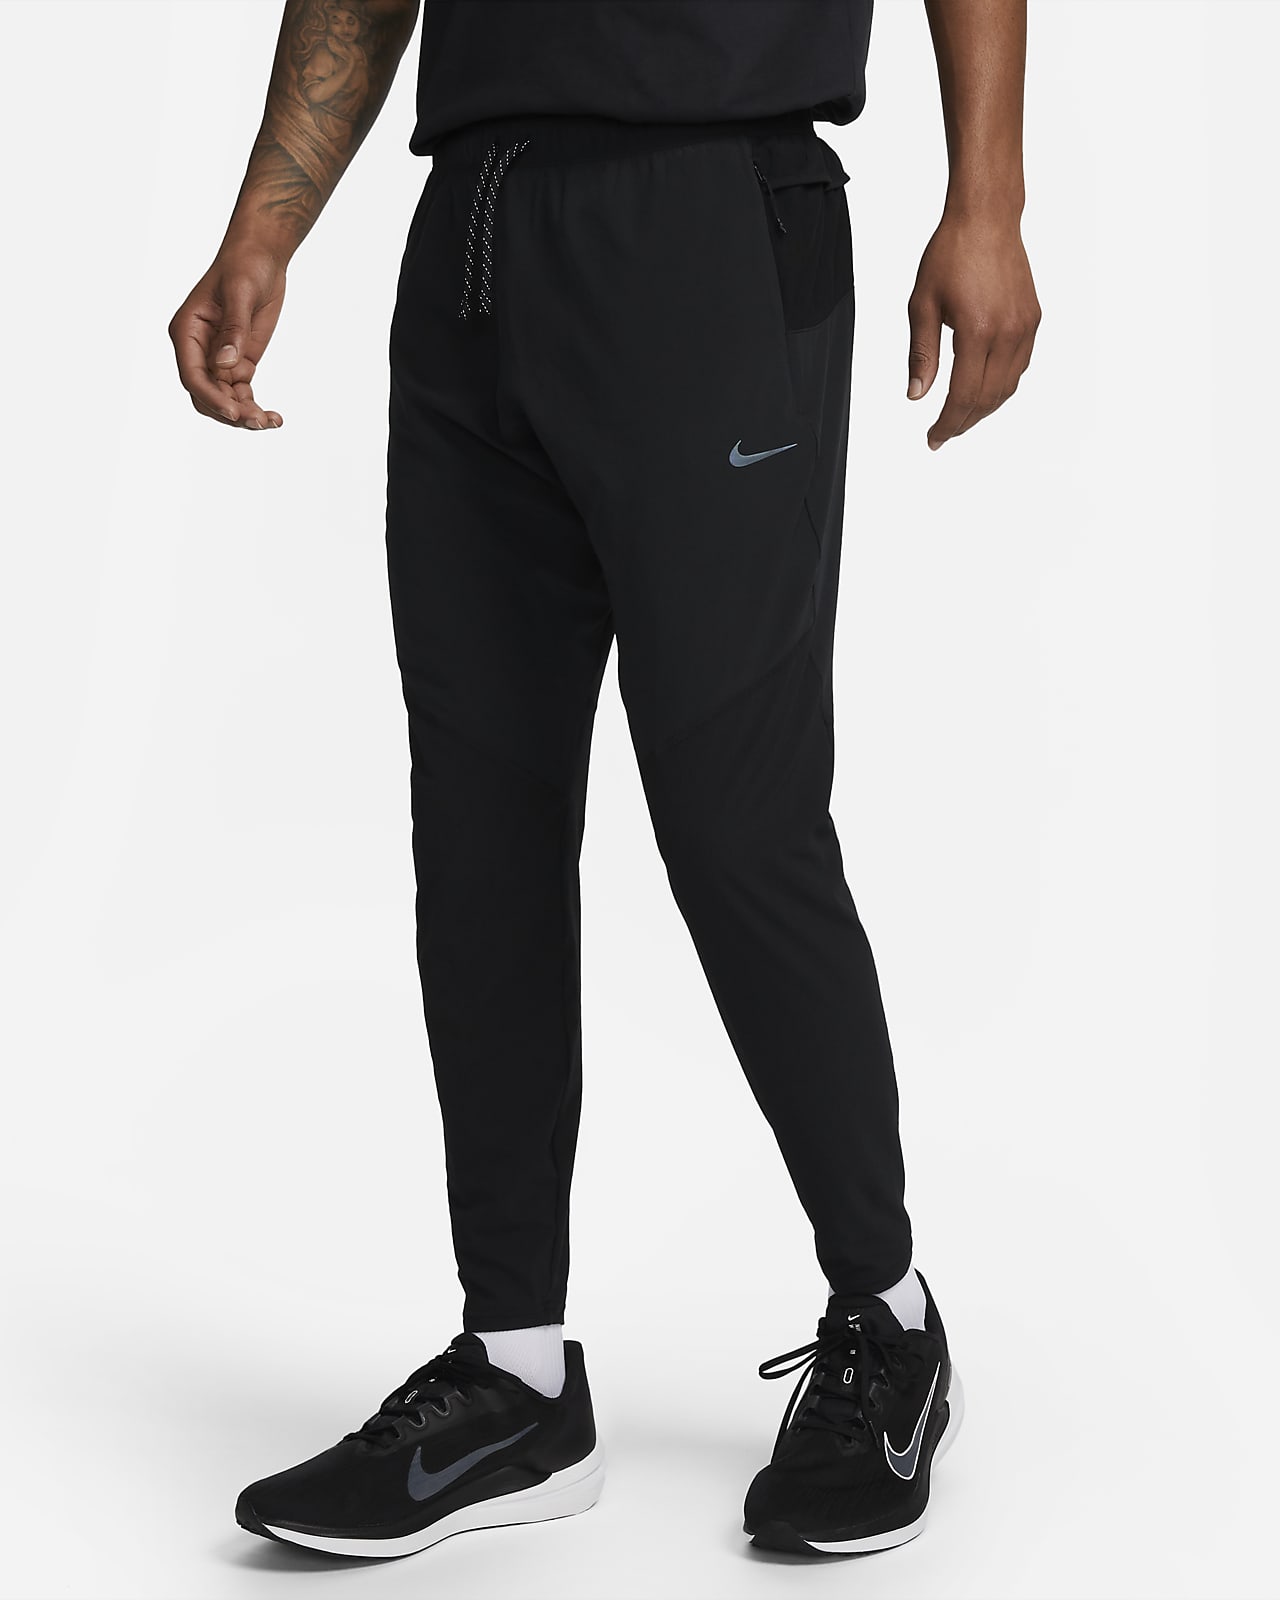 mens grey nike jogging bottoms - Free Shipping On All Orders - OFF 59%